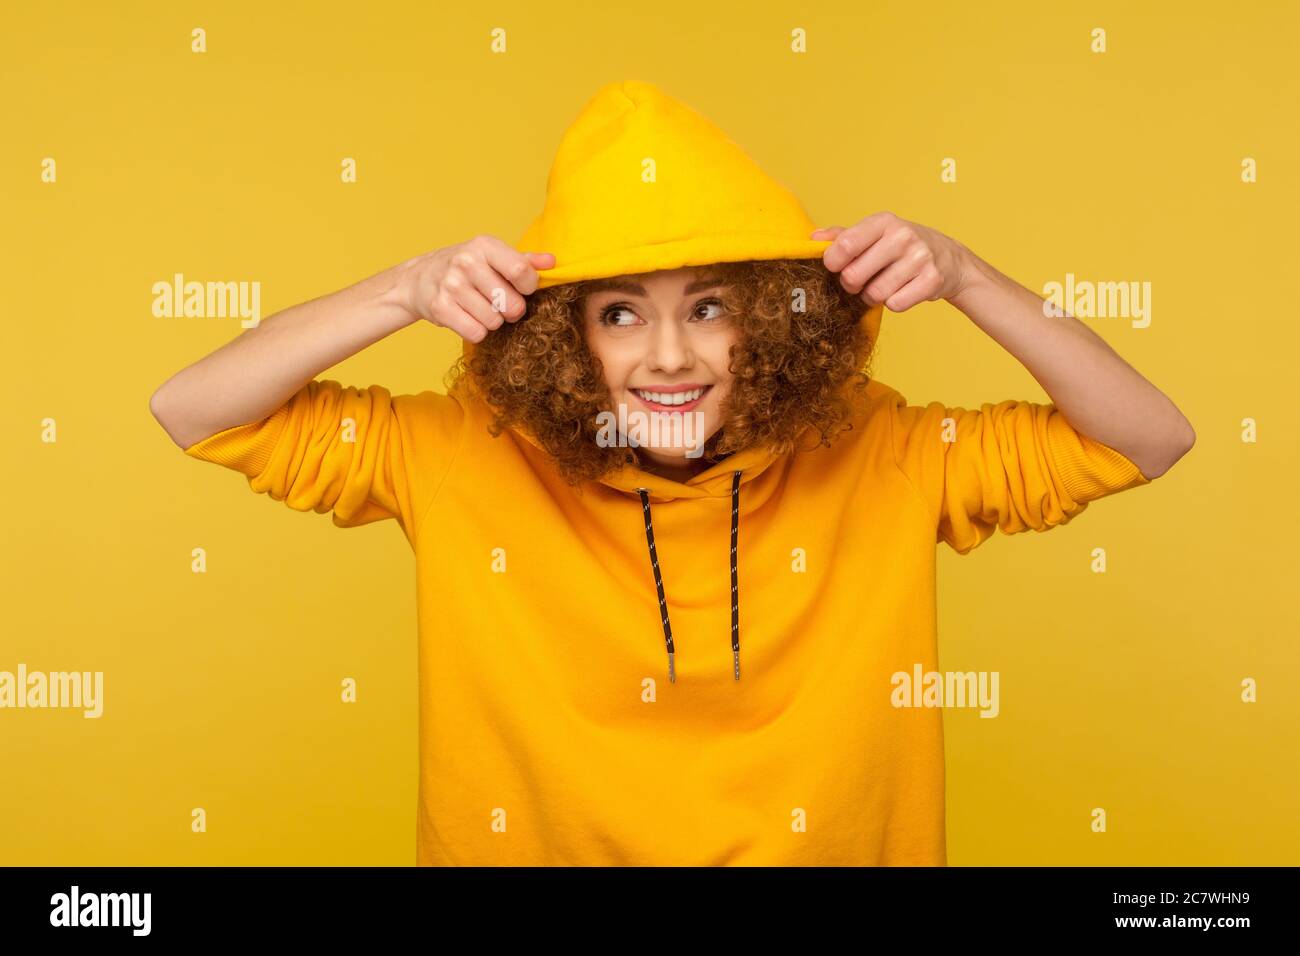 Portrait of funny smiling girl with curly hair wearing urban style hoodie, putting on hood and looking around, youth sport style female fashion. indoo Stock Photo